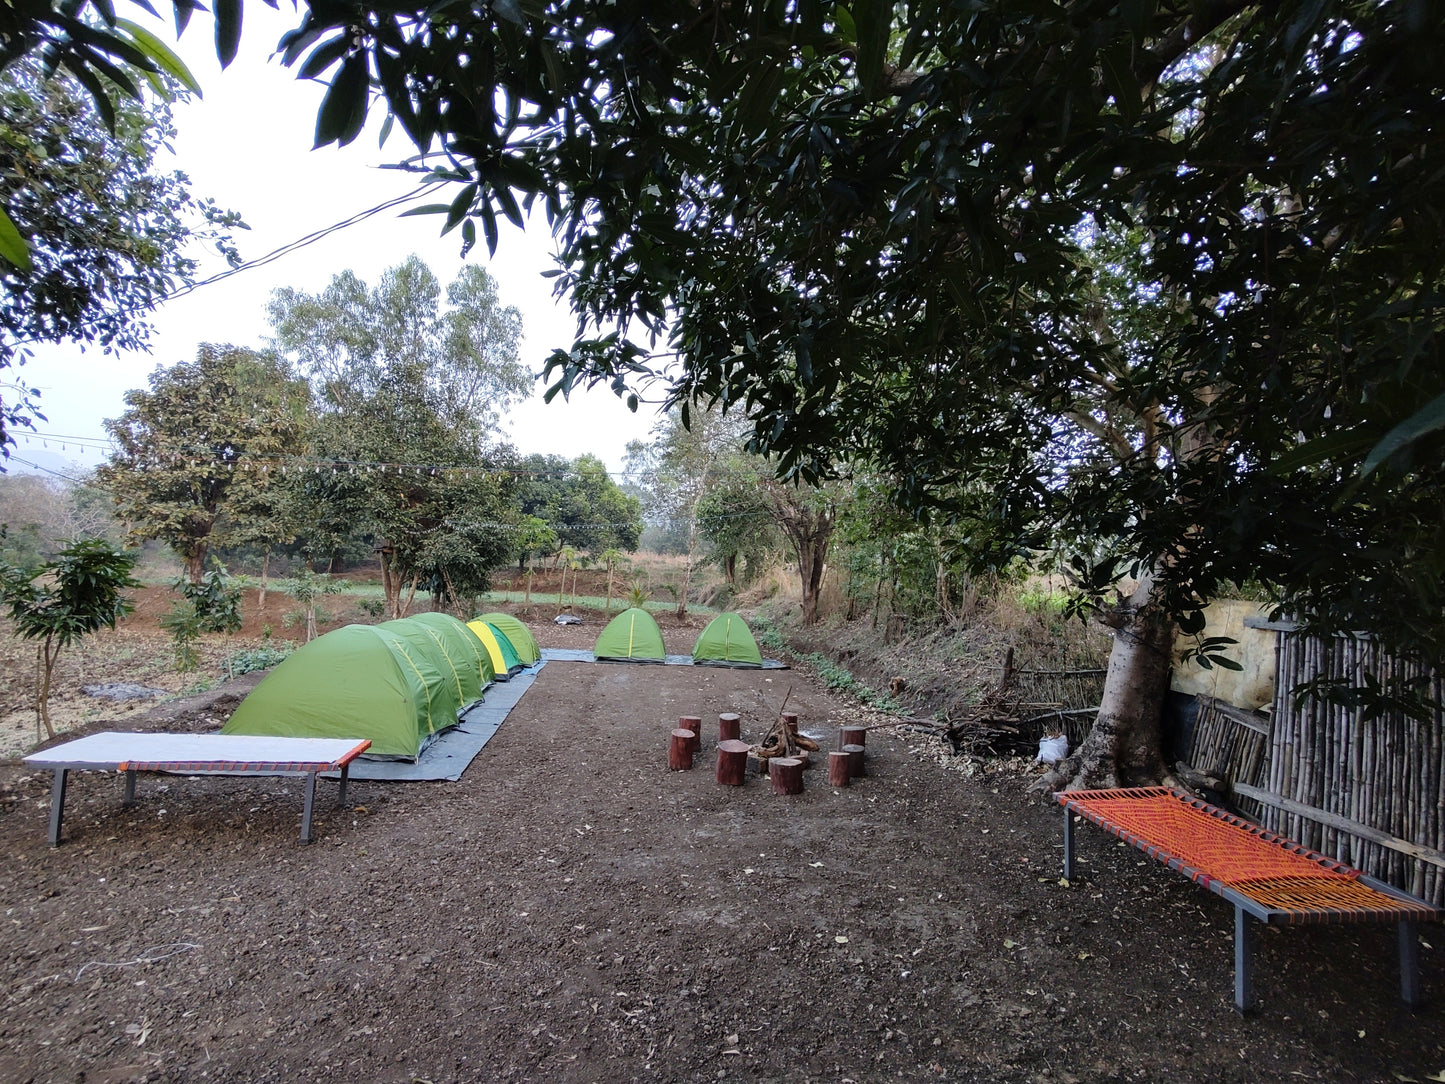 Rohida Farm Camping (Ambawade) : Stay in Tent  Night Camp Fire with Music, All Meals (Veg/Non-Veg) & MORE!